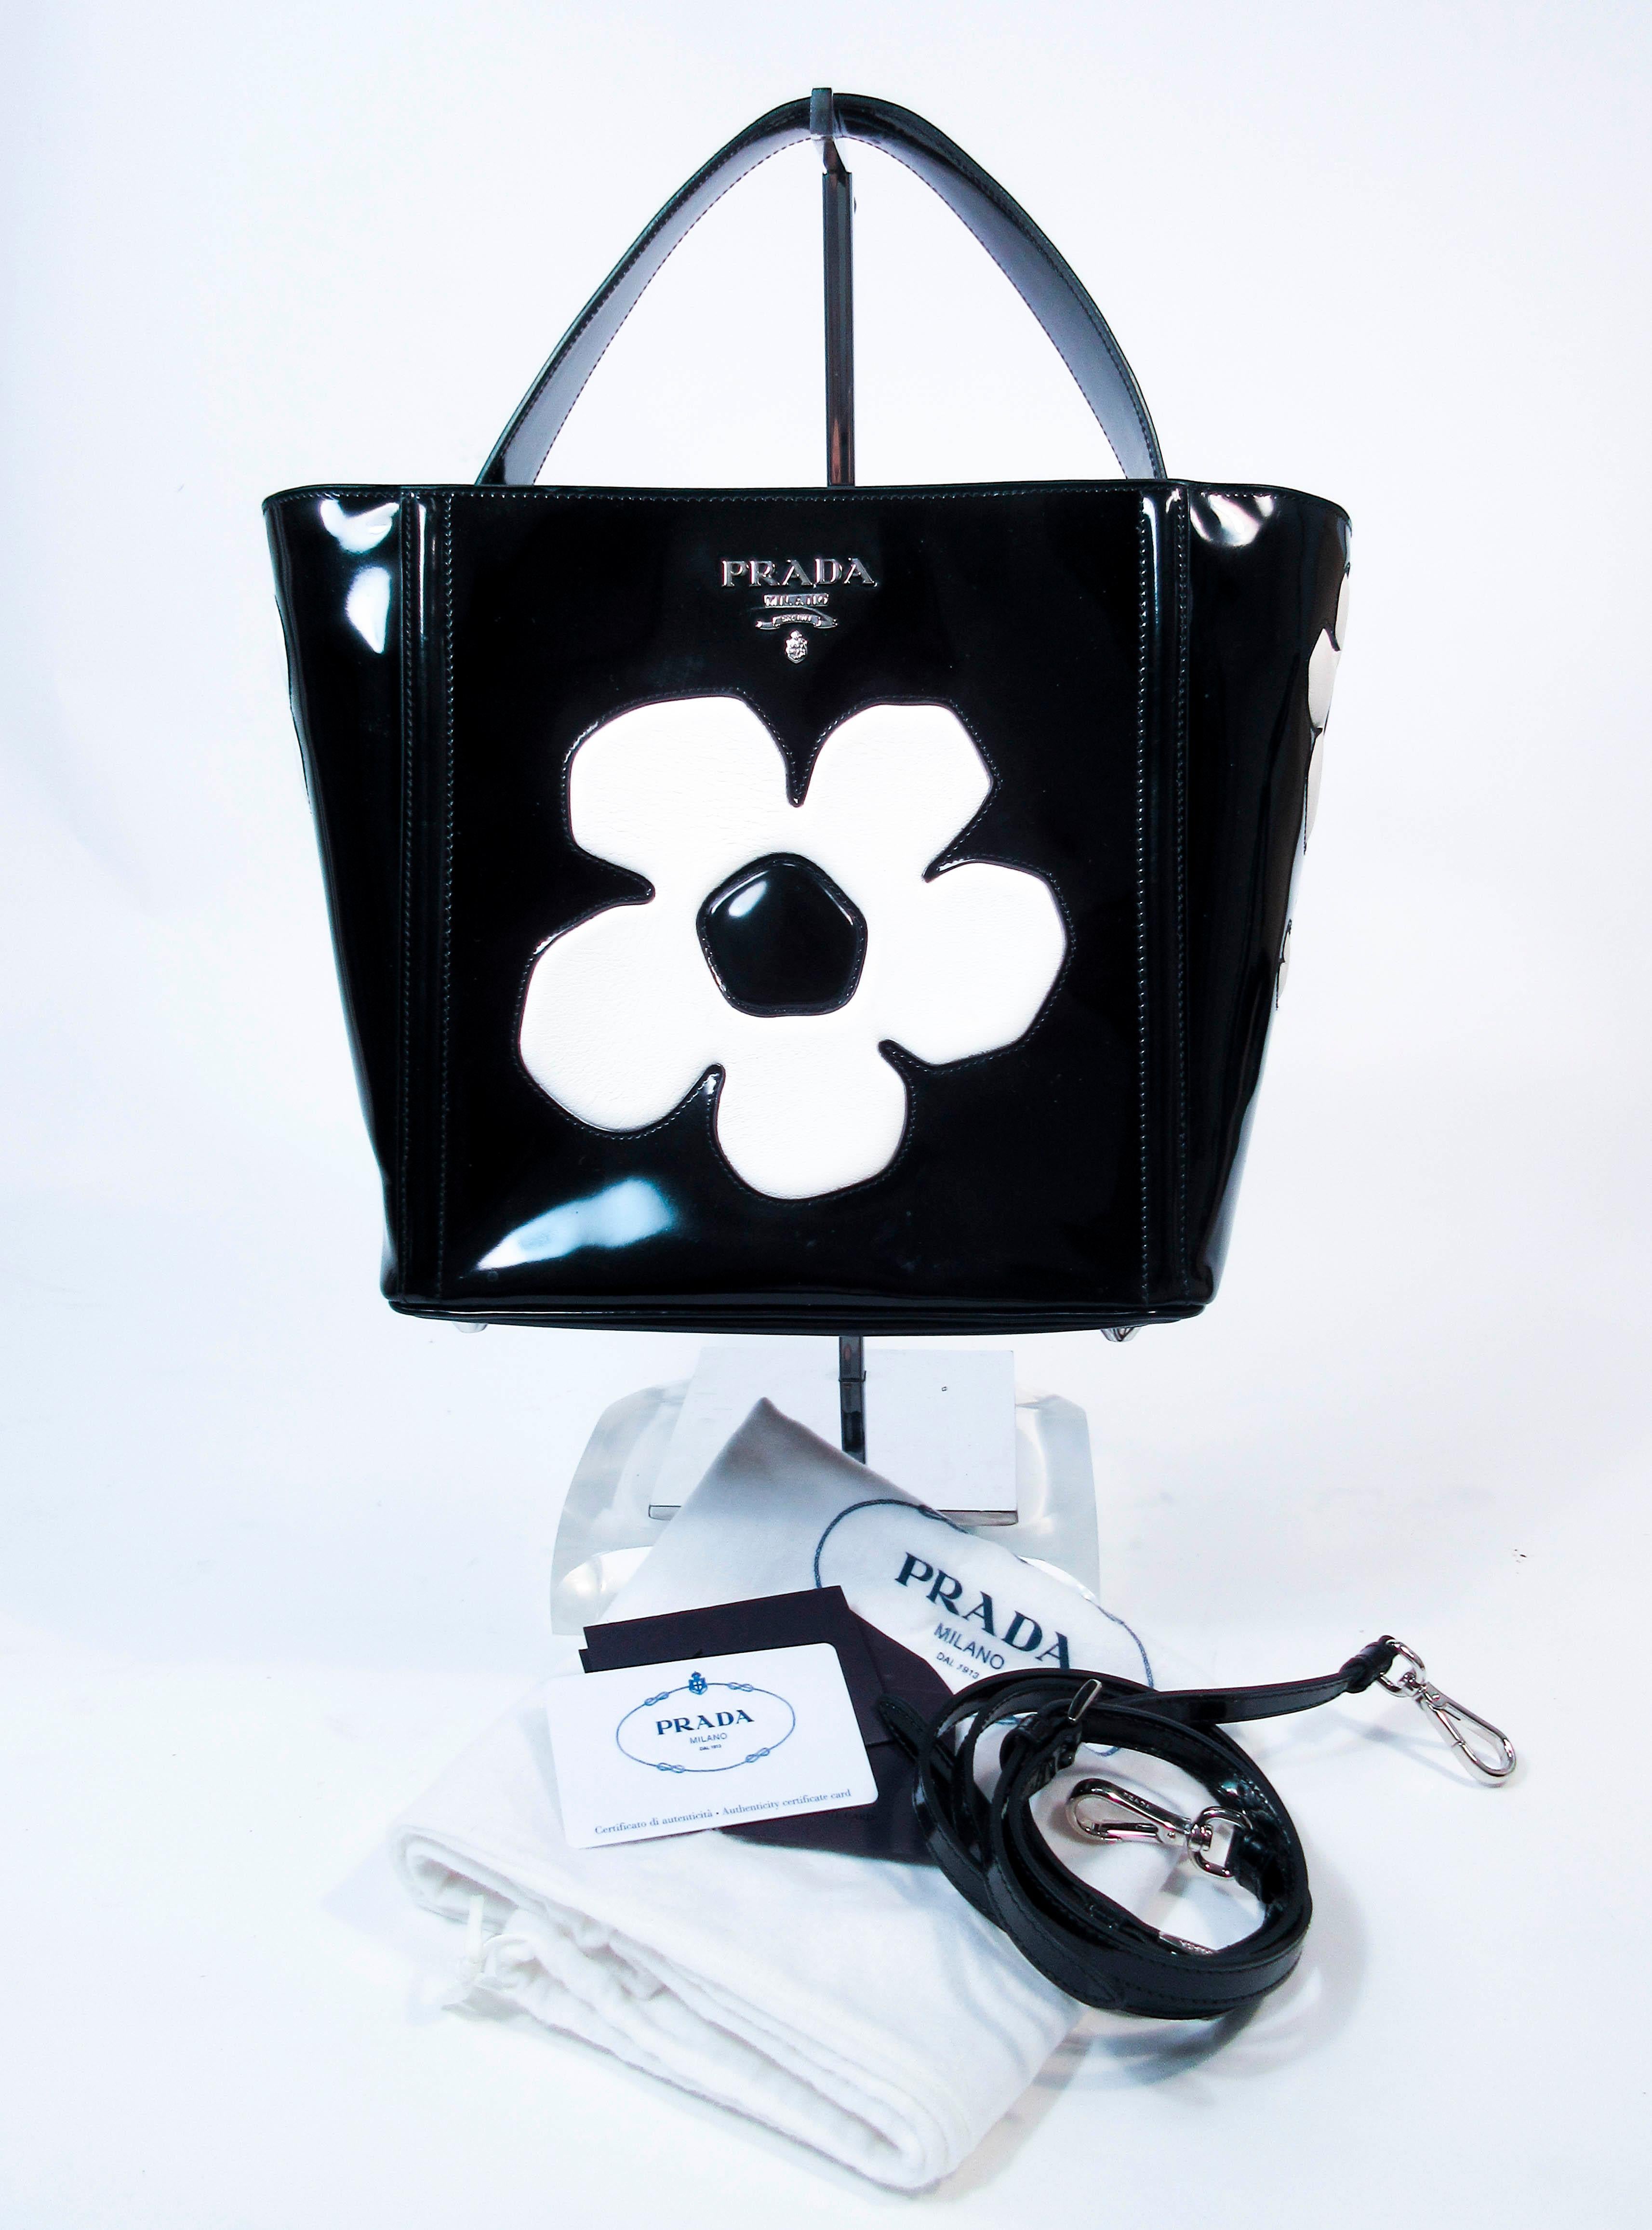 Prada Black and White Patent Leather Flower Purse with Optional Shoulder Strap  3